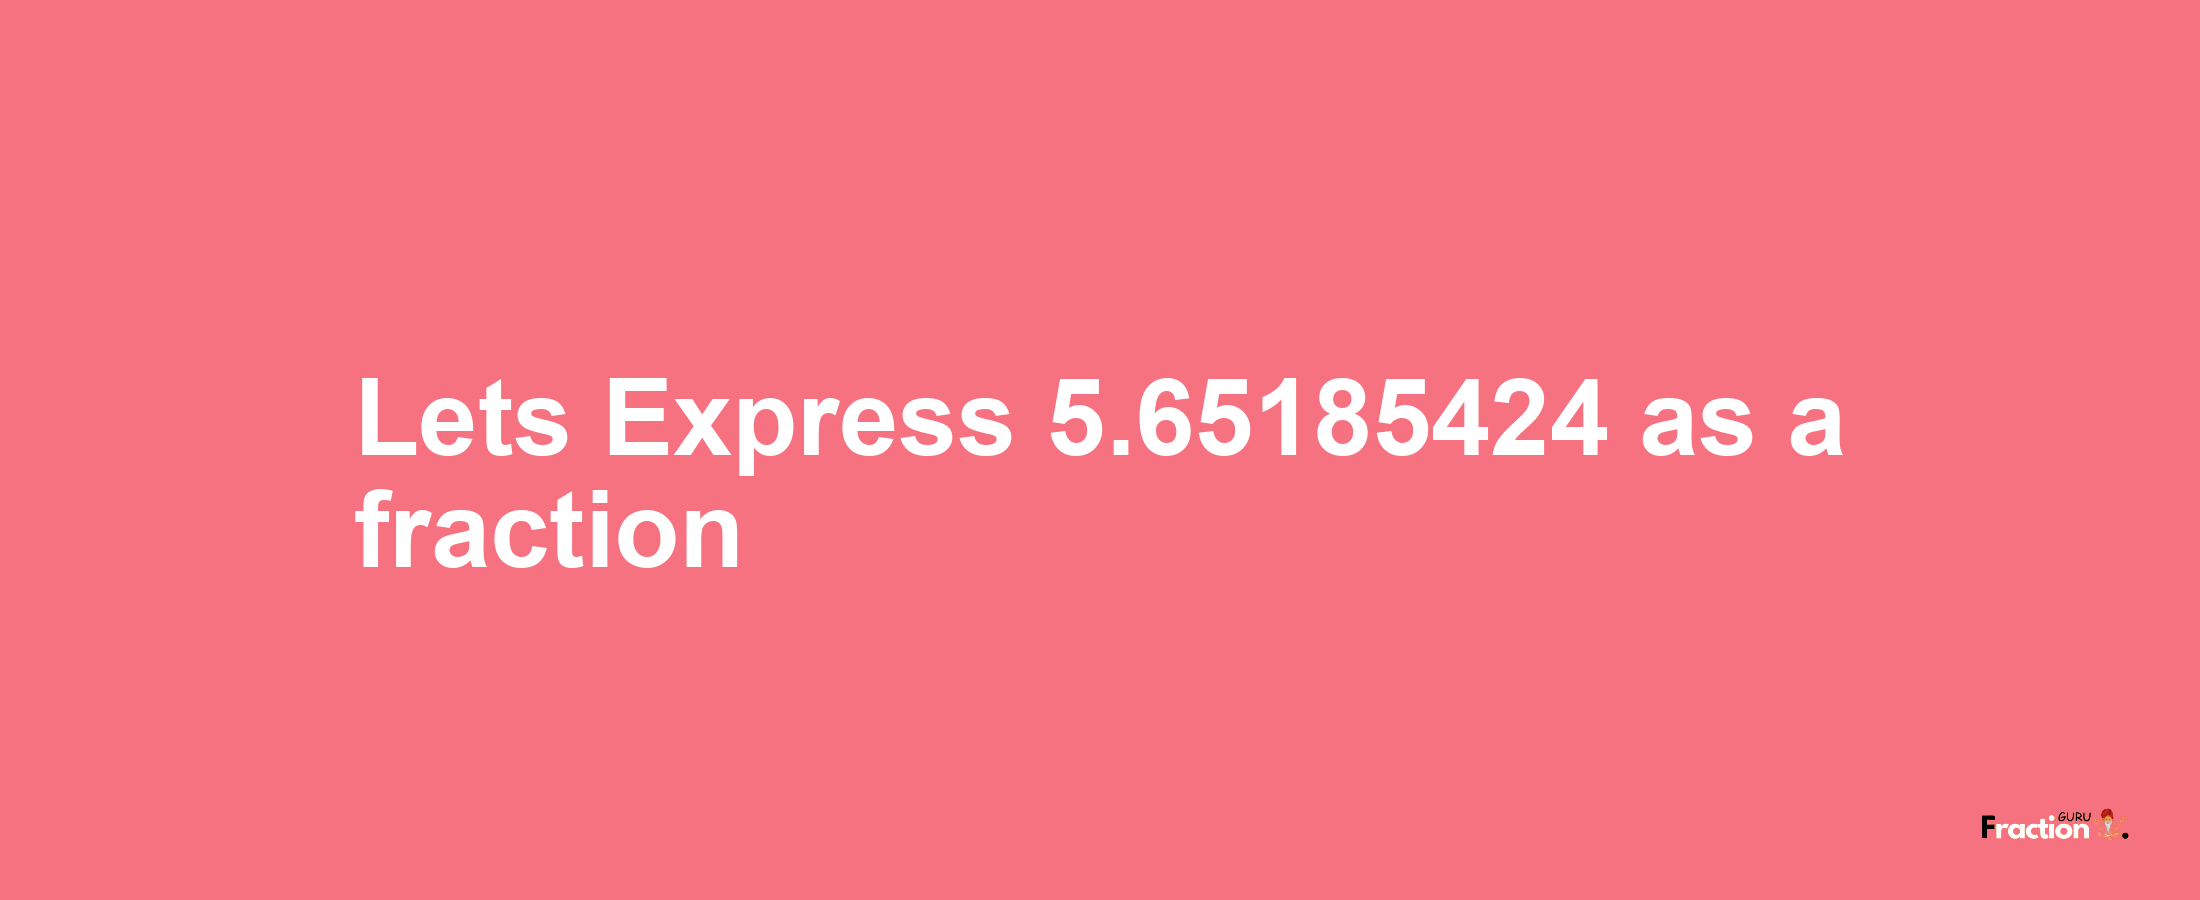 Lets Express 5.65185424 as afraction